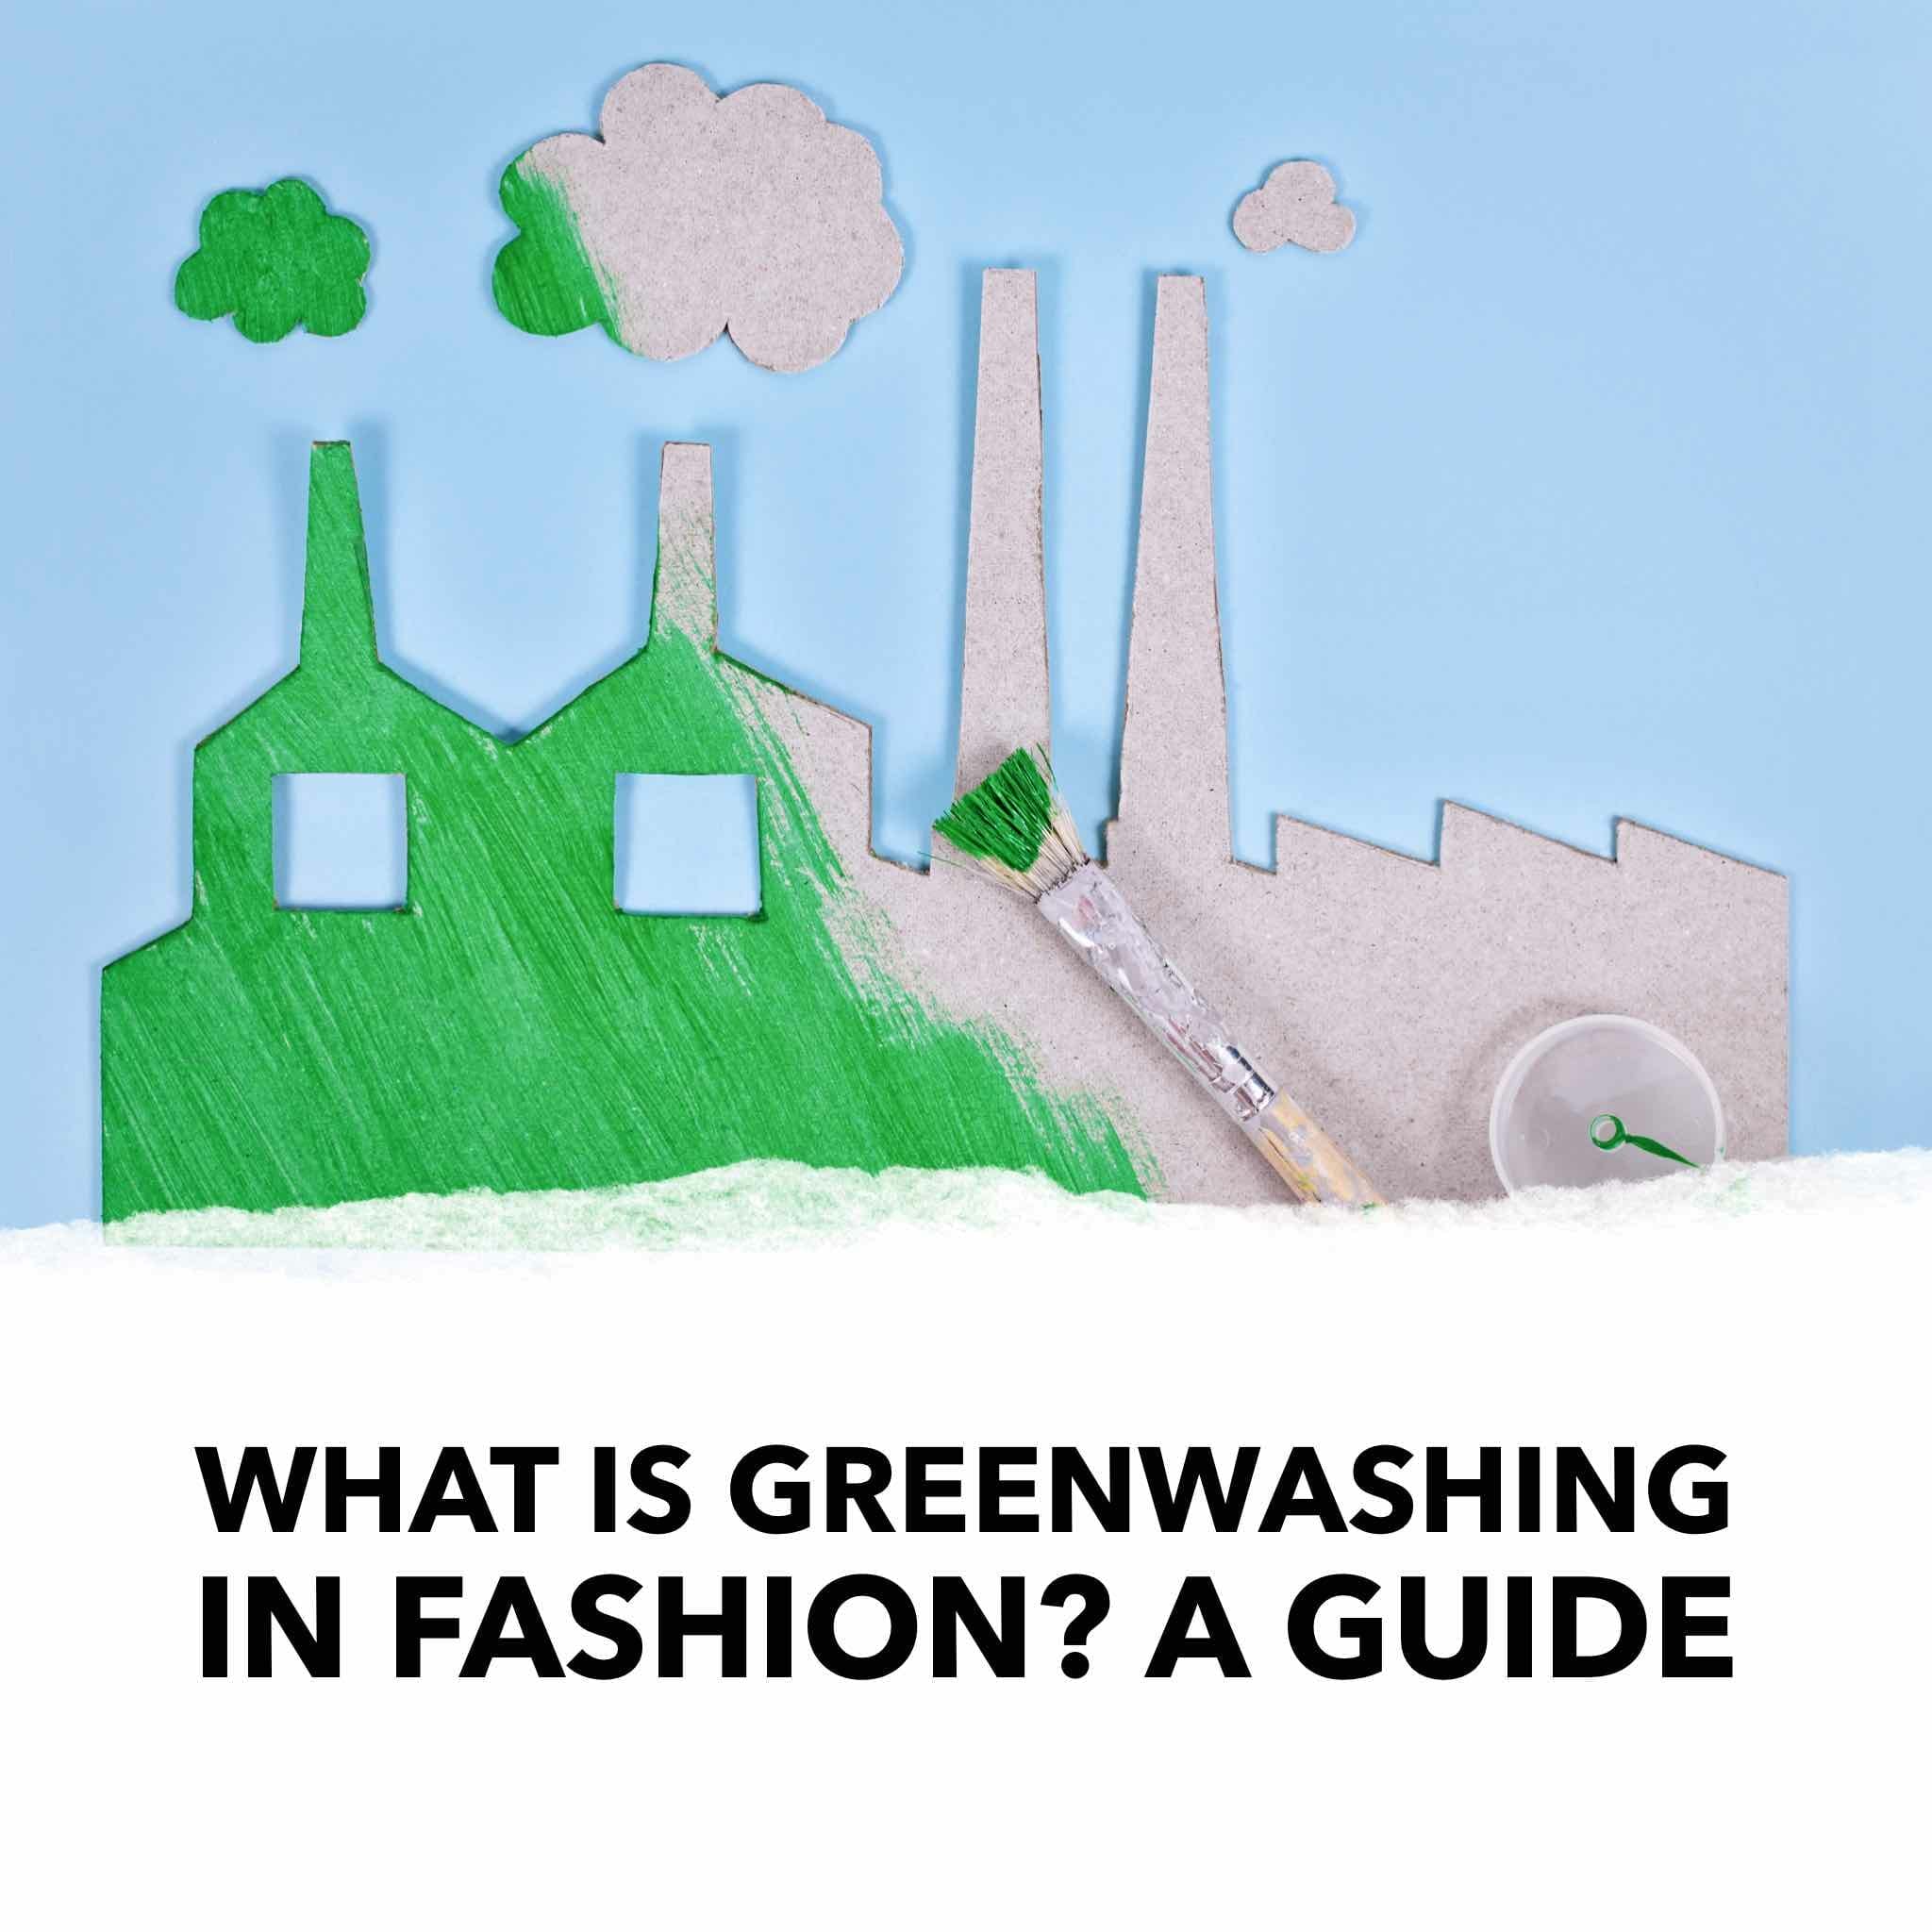 what is greenwashing in fashion? A guide